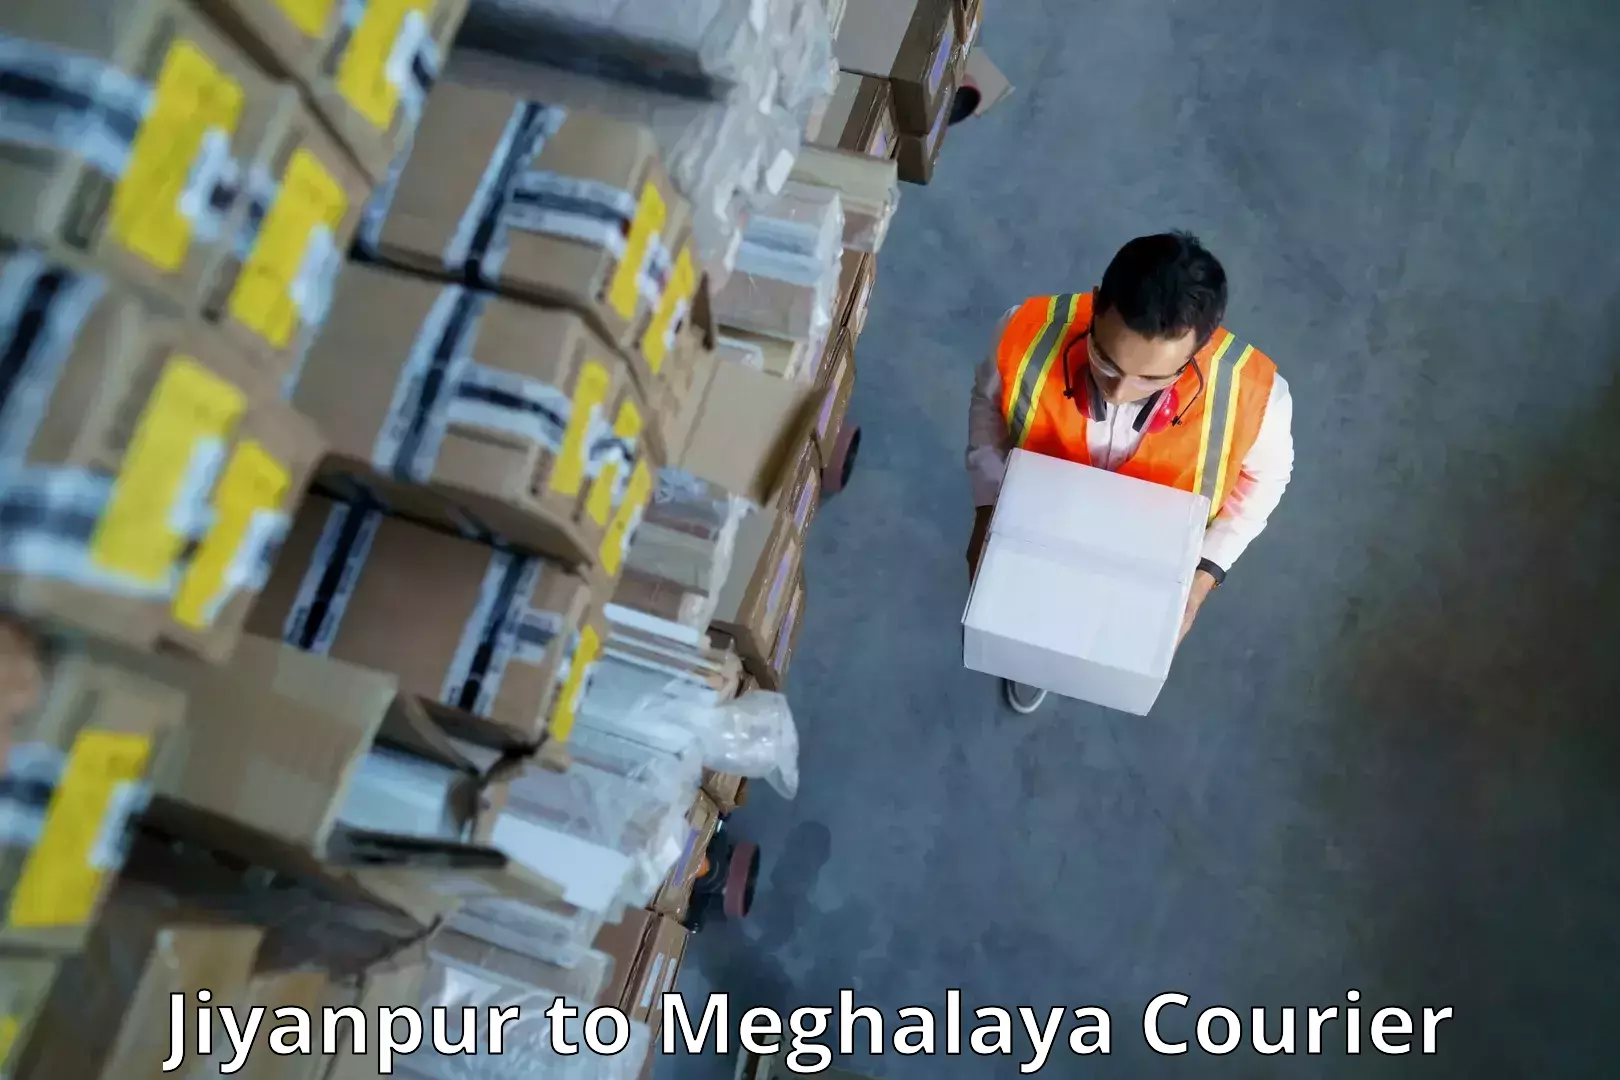 Premium courier solutions in Jiyanpur to Meghalaya